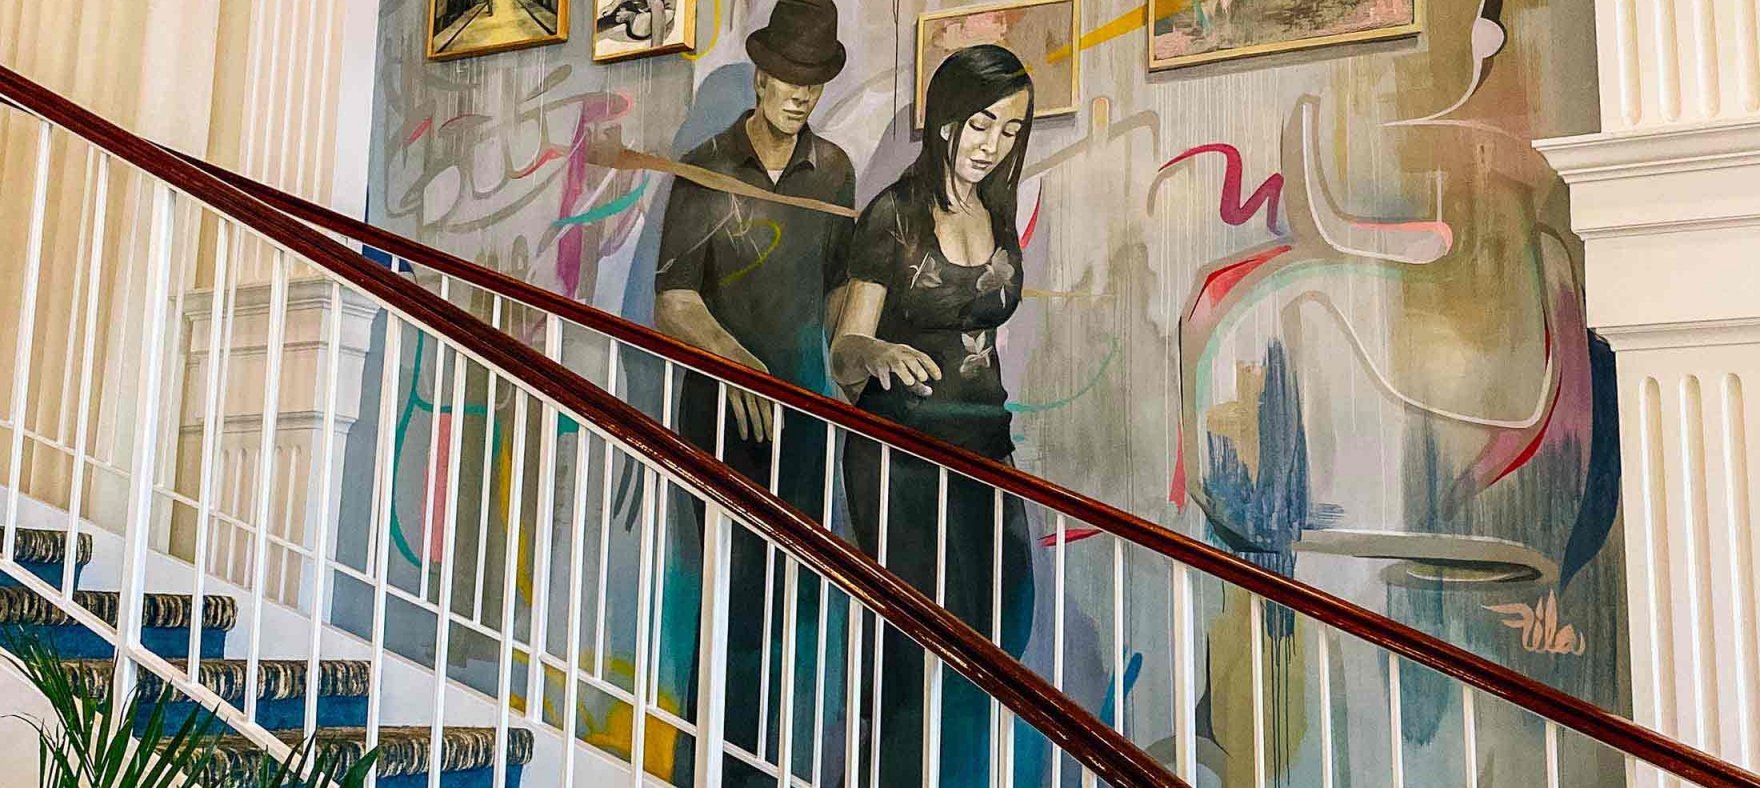 A staircase next to the wall mural with framed artwork and photographs